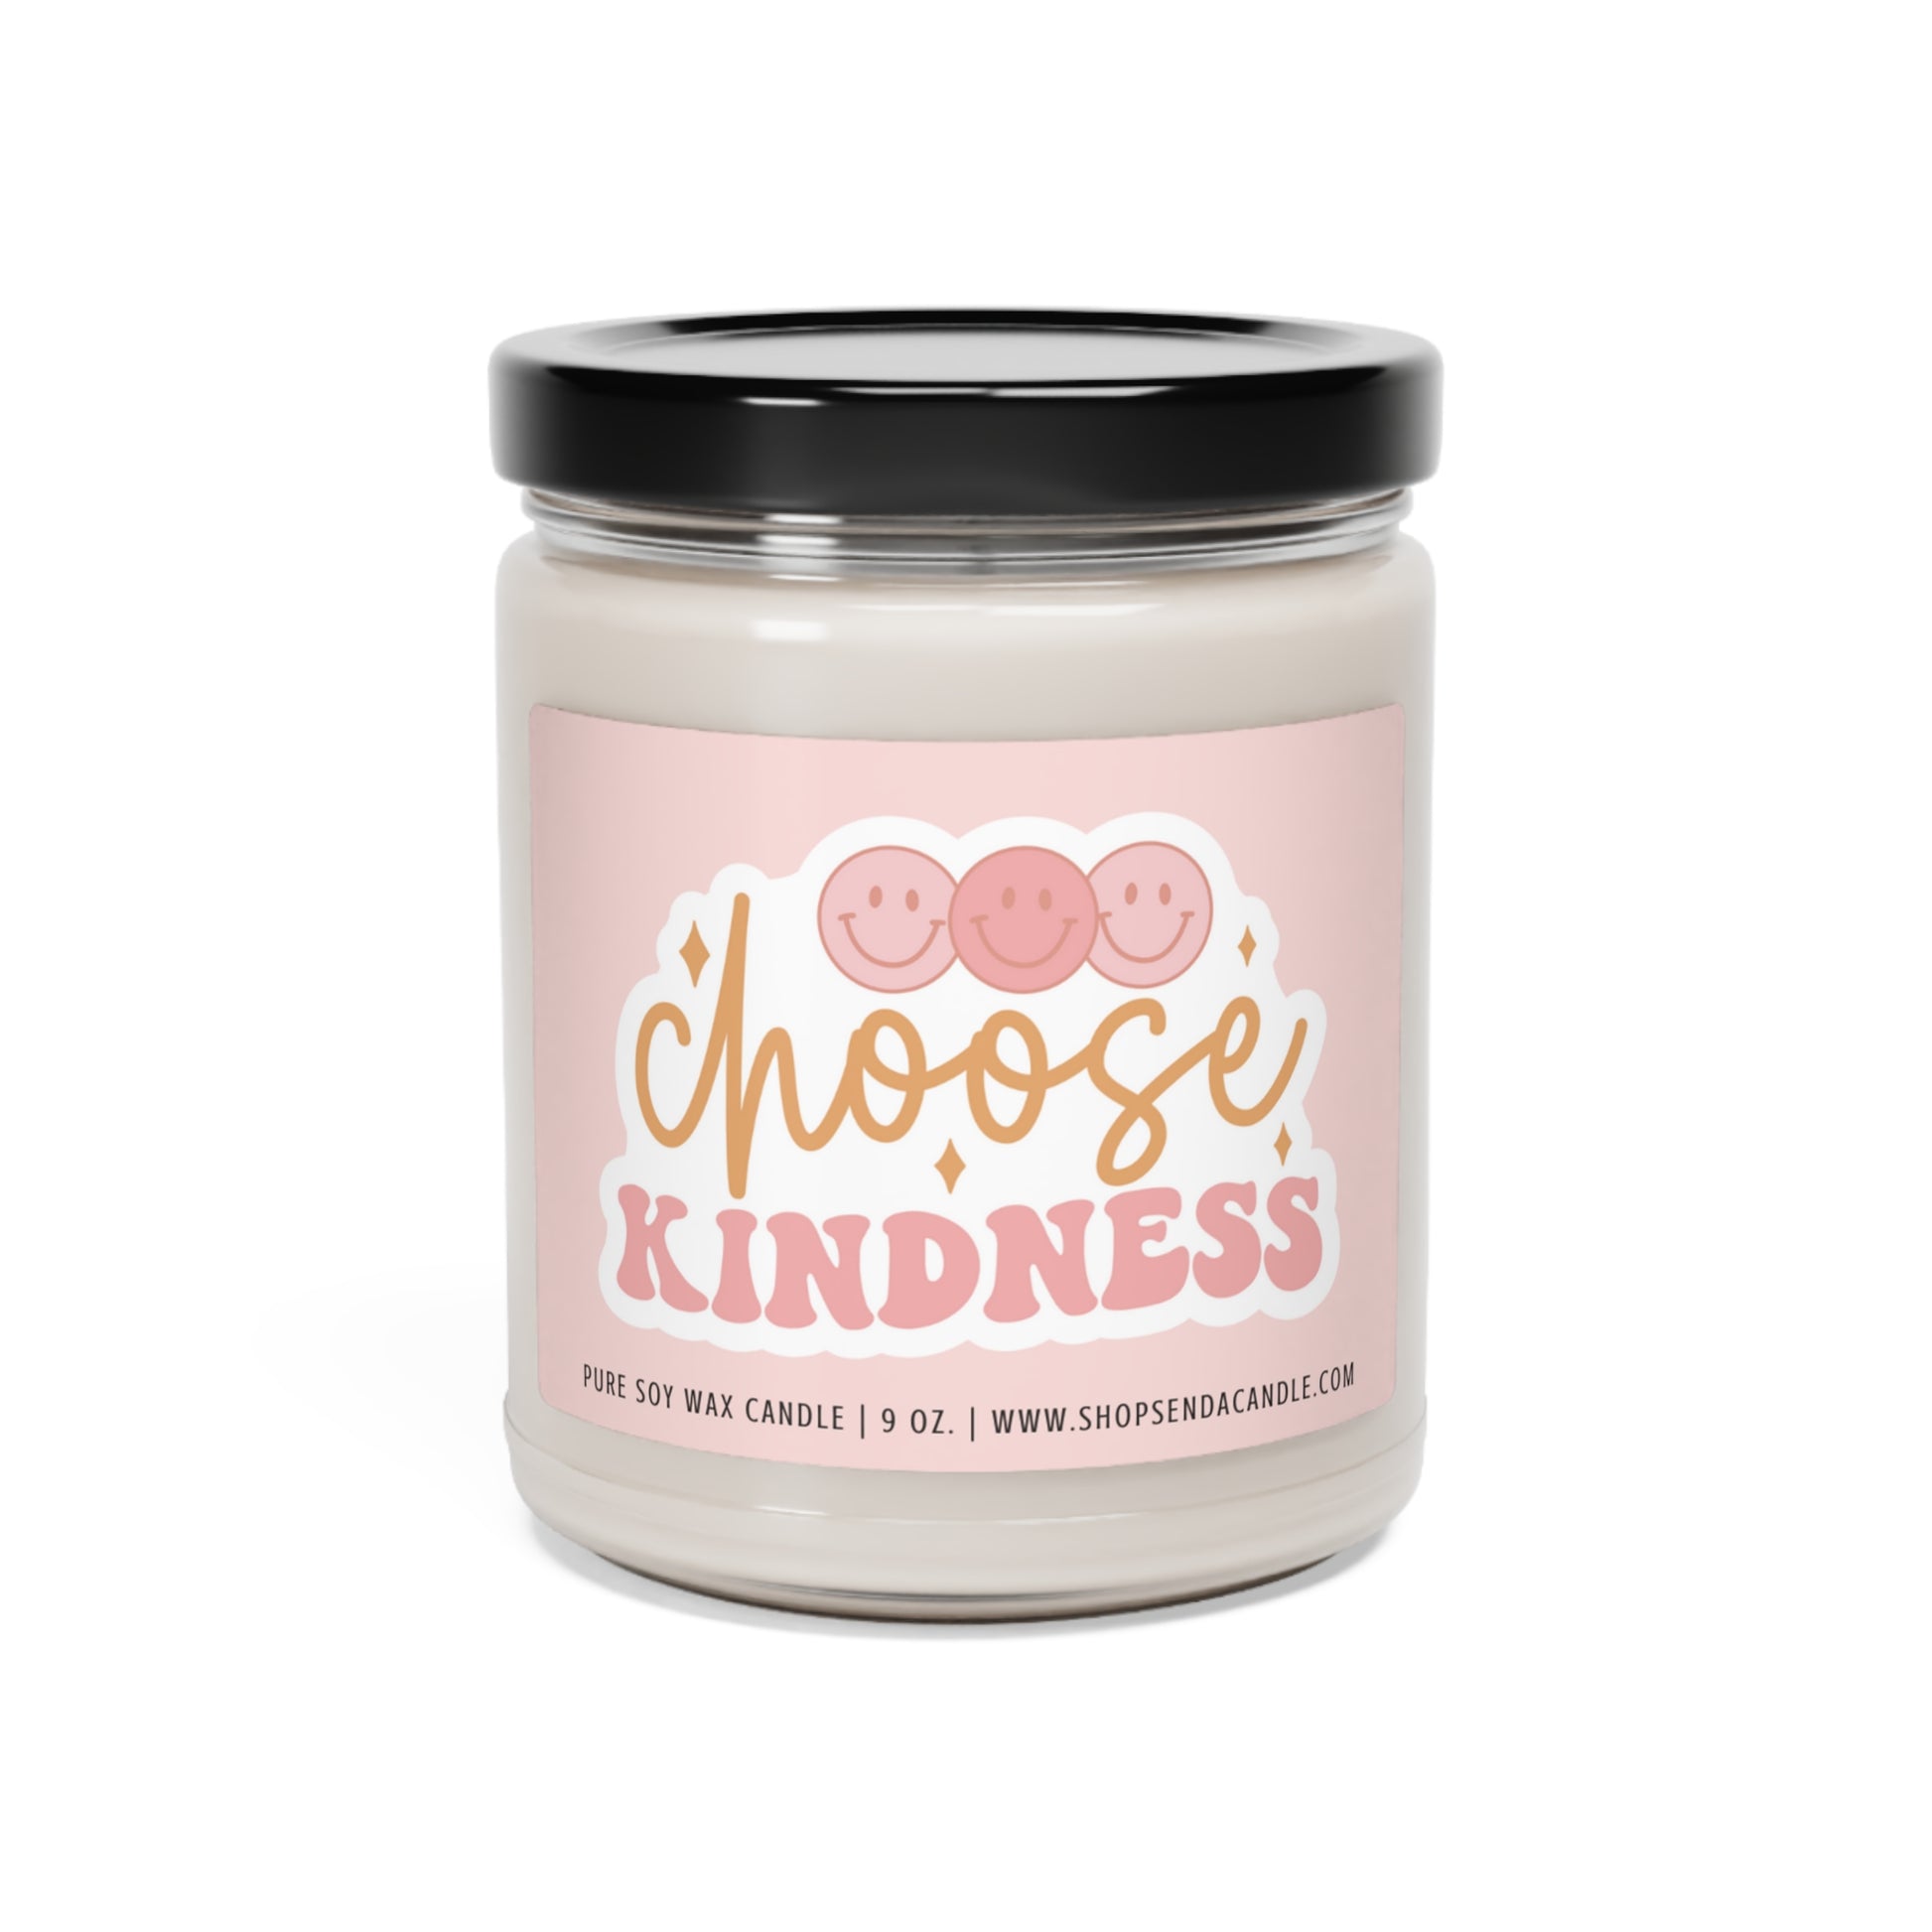 Encouragement Gift Ideas | Send A Candle